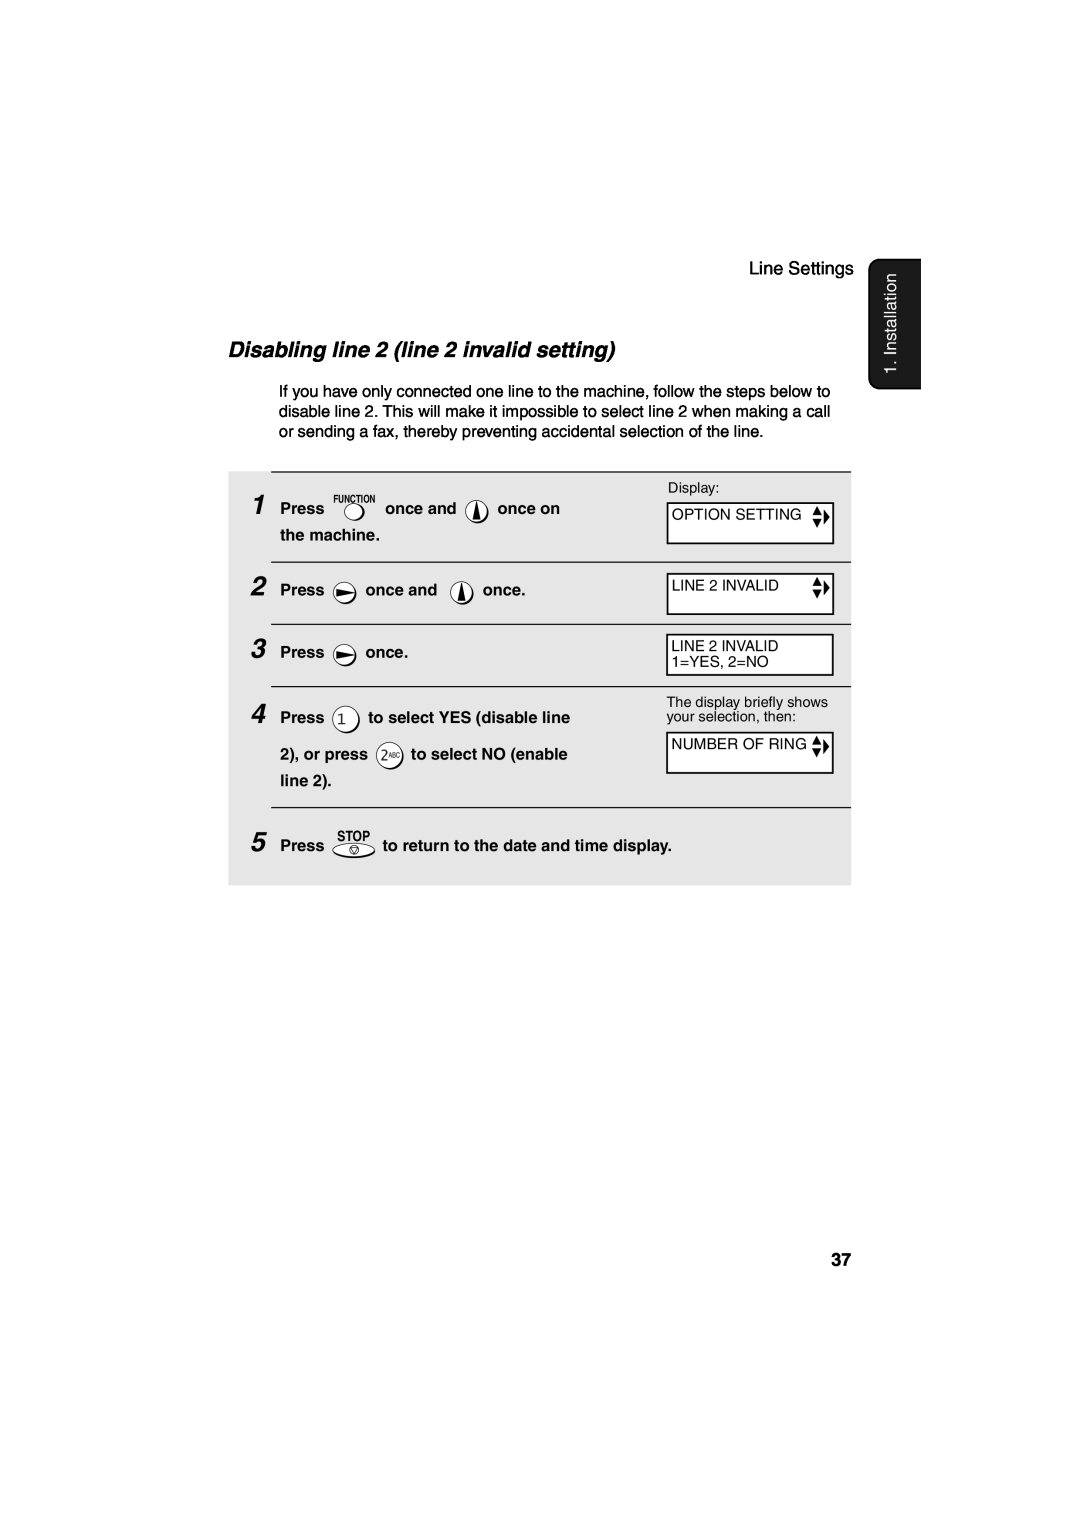 Sharp UX-CD600 operation manual Disabling line 2 line 2 invalid setting, Installation, Number Of Ring 